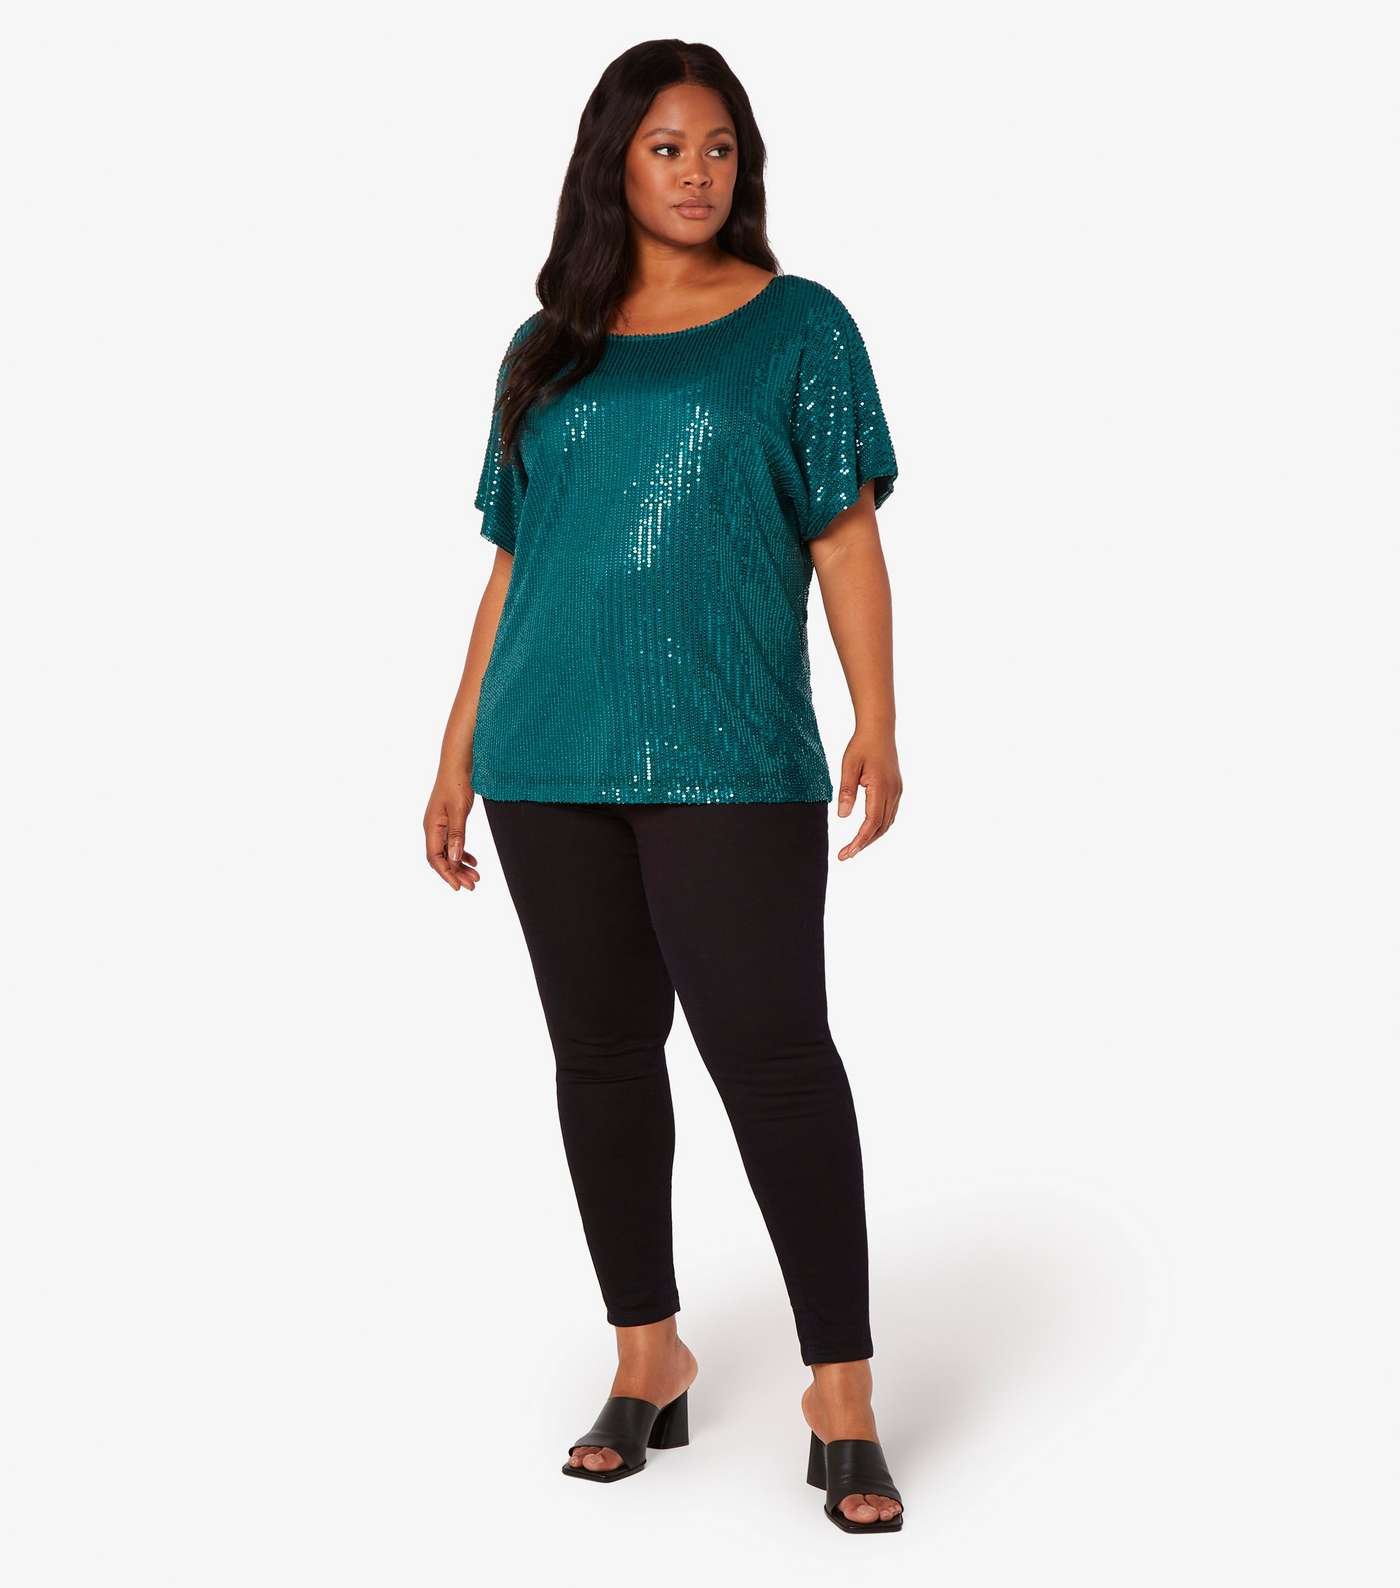 Apricot Curves Dark Green Sequin Top Image 2